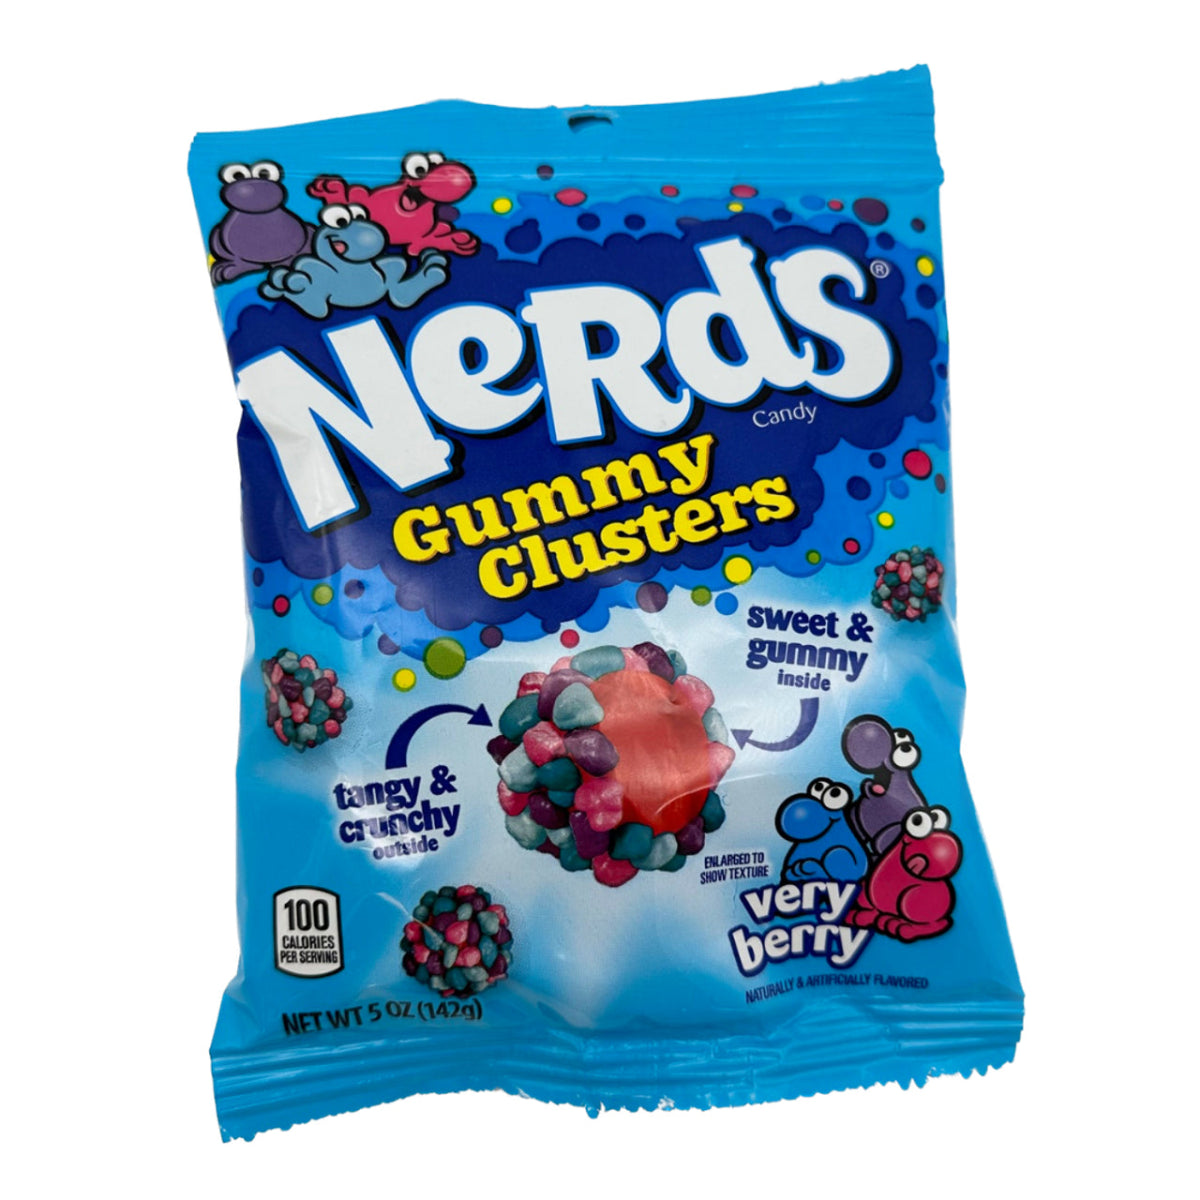 Nerds Gummy Clusters Very Berry 142g - Candy Mail UK